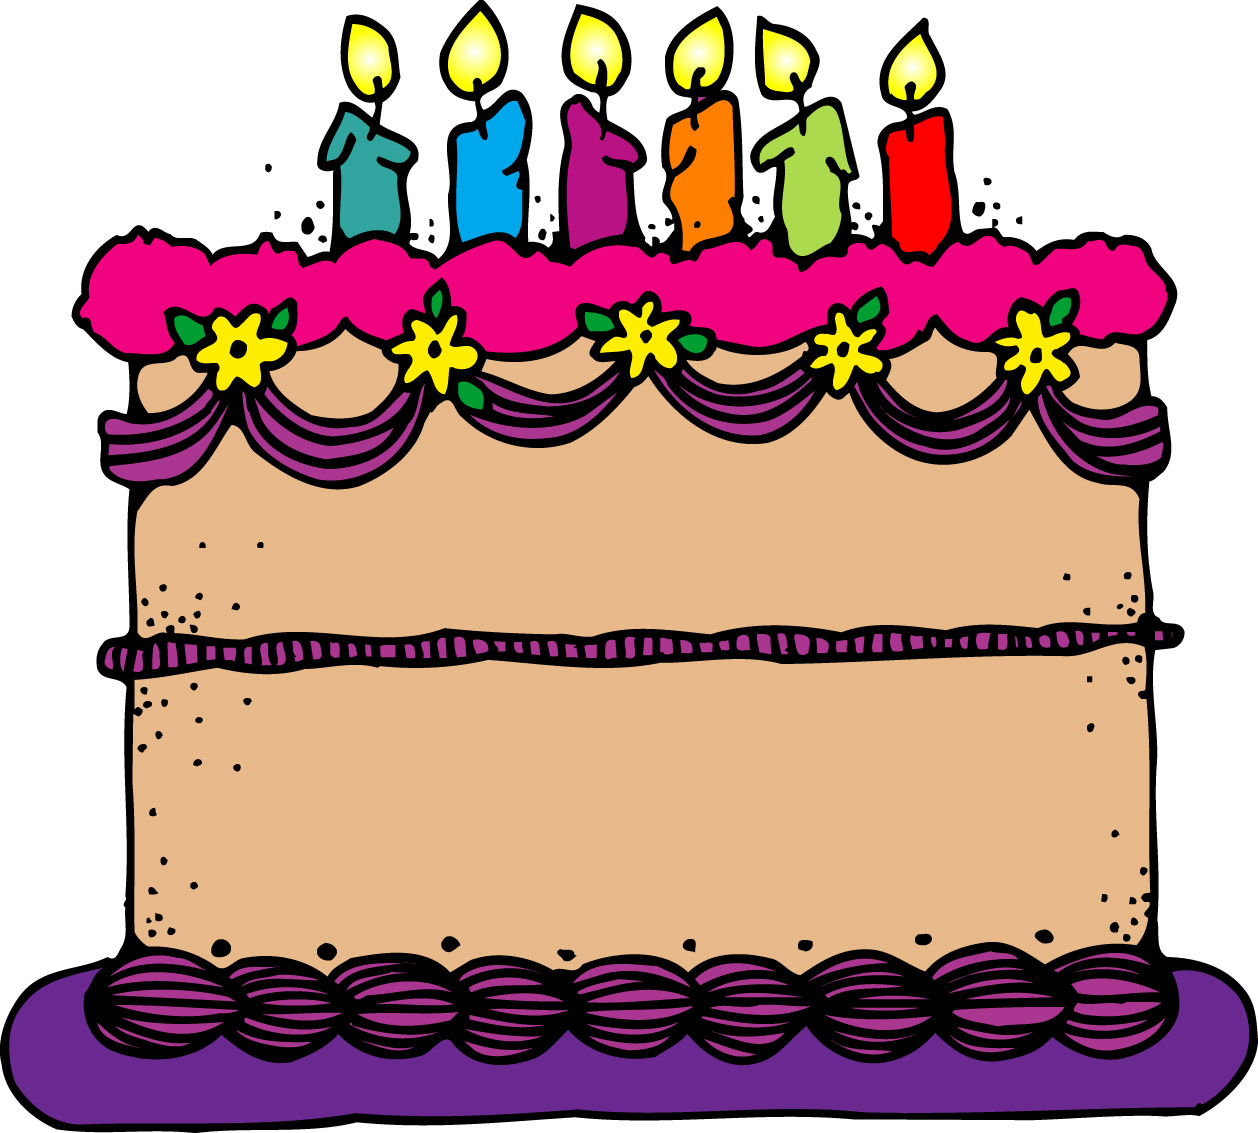 Birthday cake clip art free clipart images 4